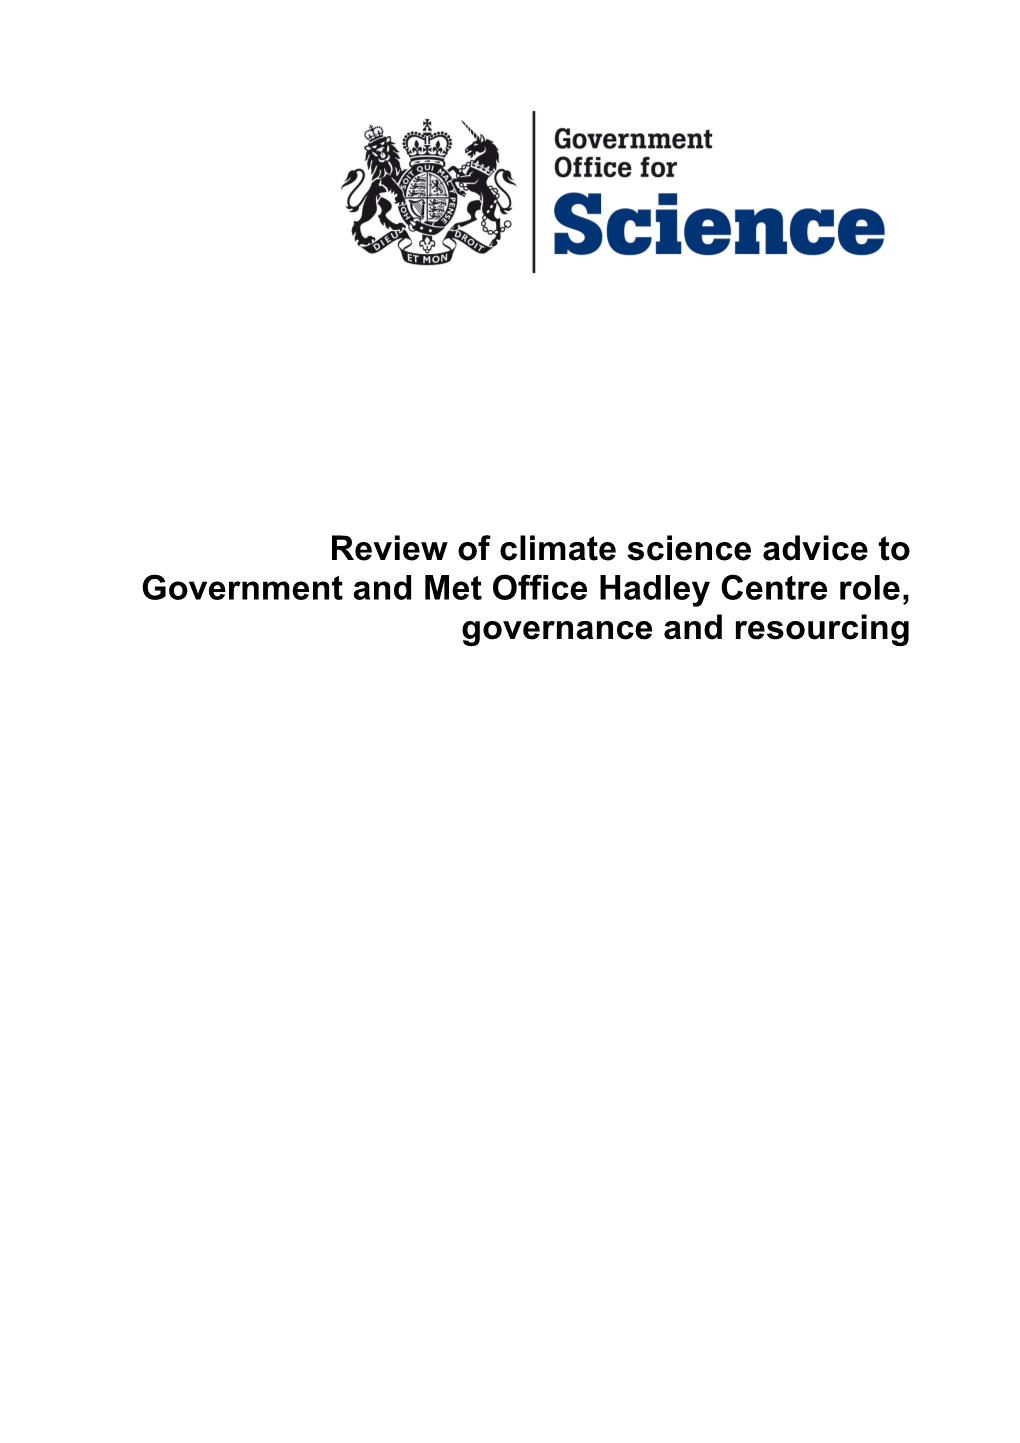 Review of Climate Science Advice to Government and Met Office Hadley Centre Role, Governance and Resourcing